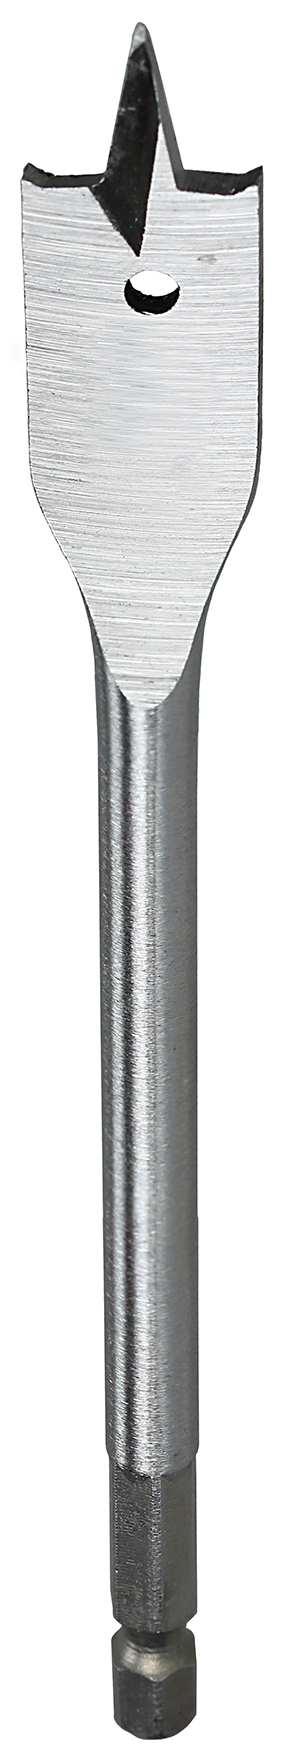 Spade Drill Bit, 1/2 in. Size, Hex shank type, Cold Forged Steel material, 6 in. drilling depth